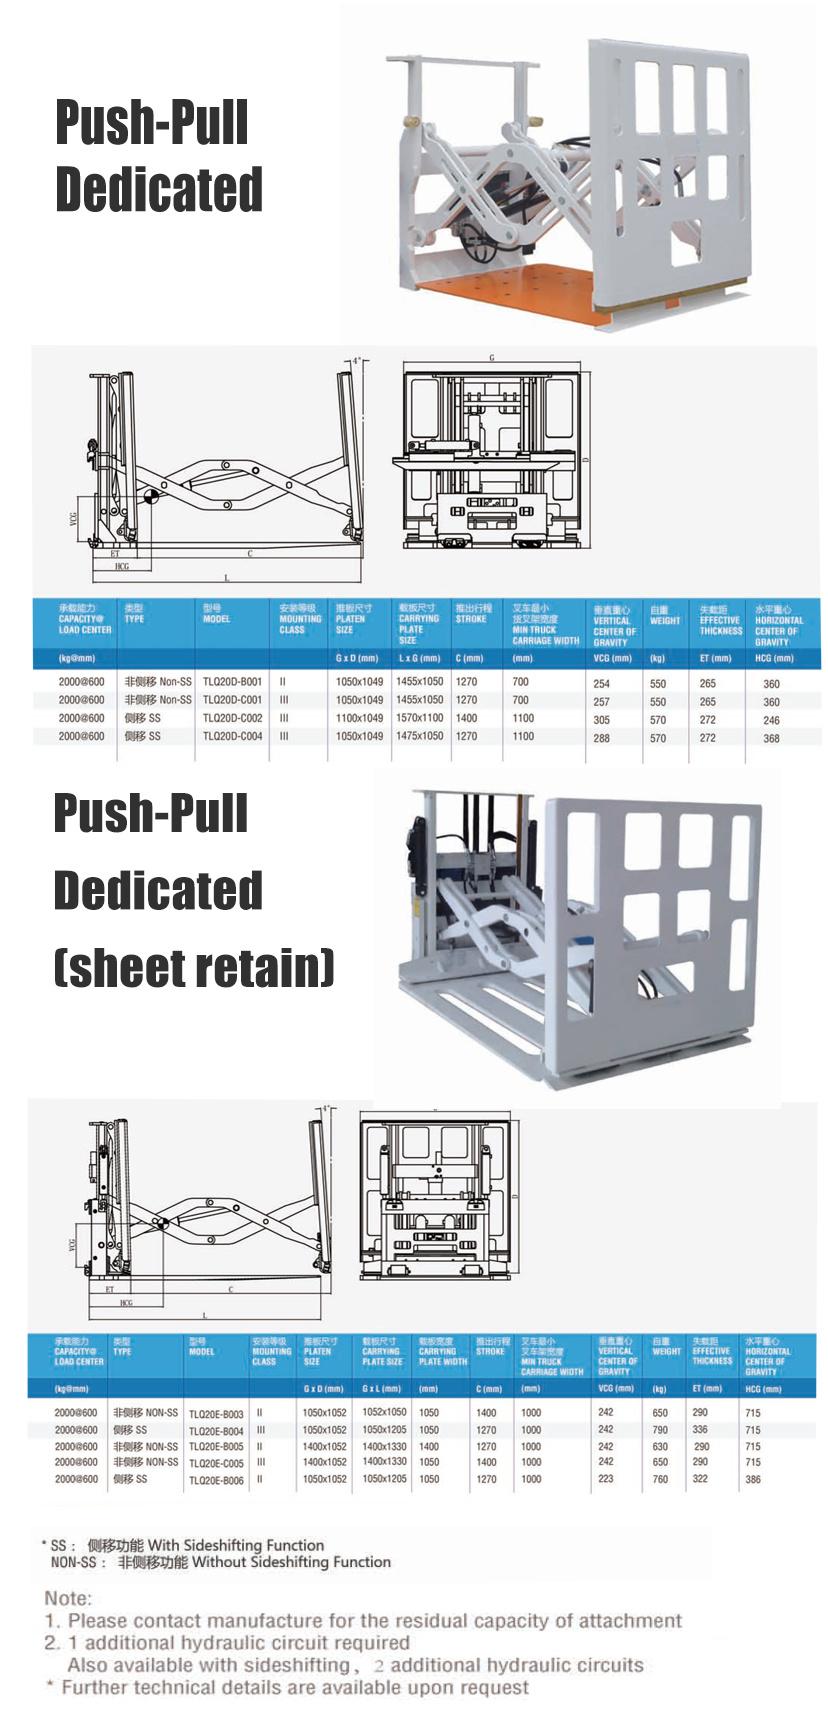 Forklift Attachments Push & Pull for Palletless Packed Goods